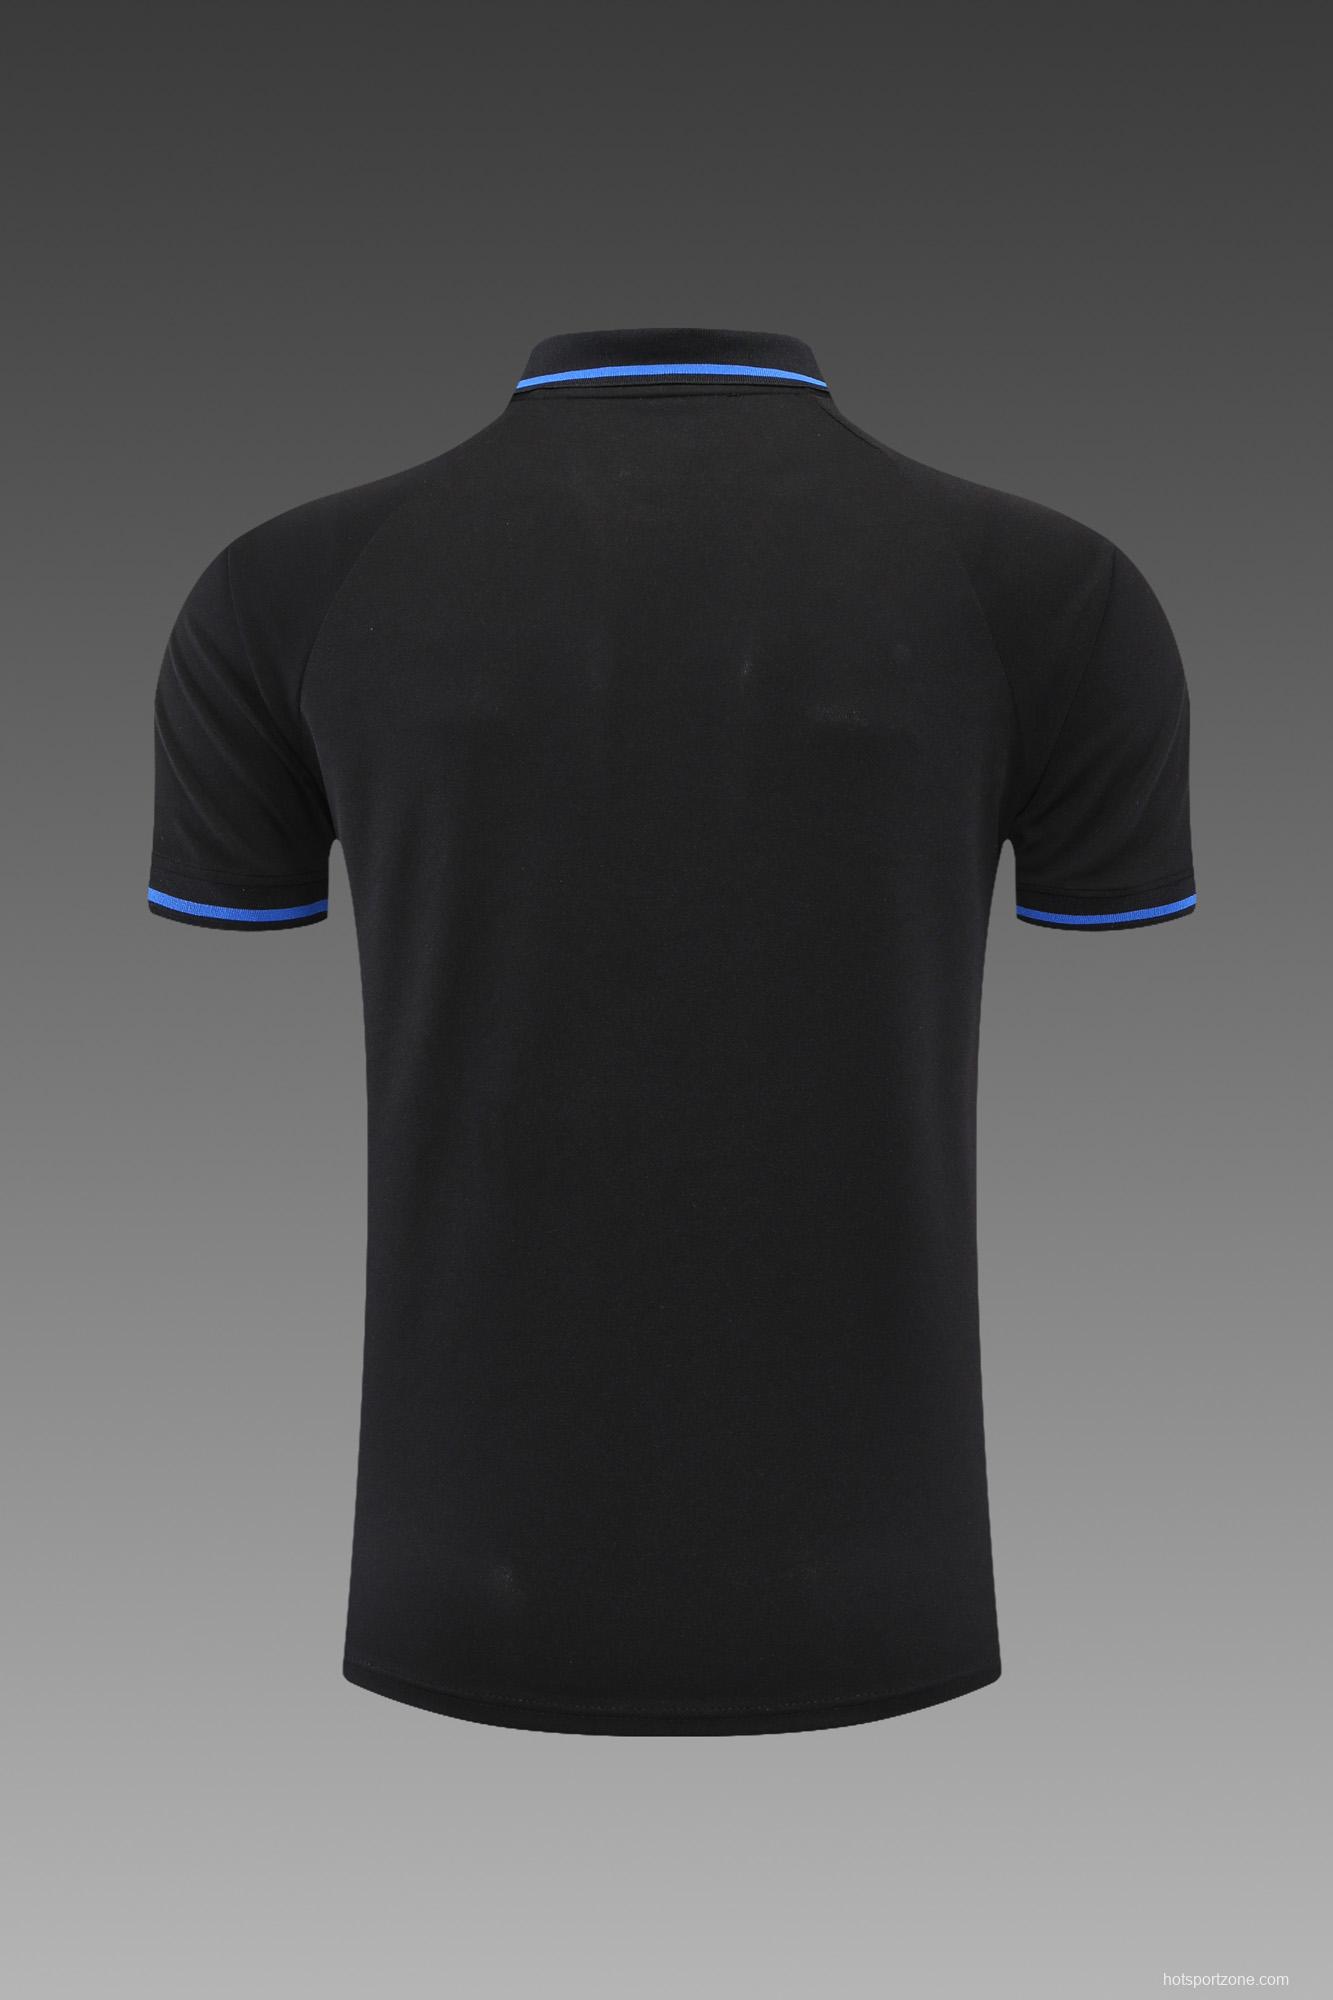 Manchester United POLO kit black and blue stripes(not supported to be sold separately)